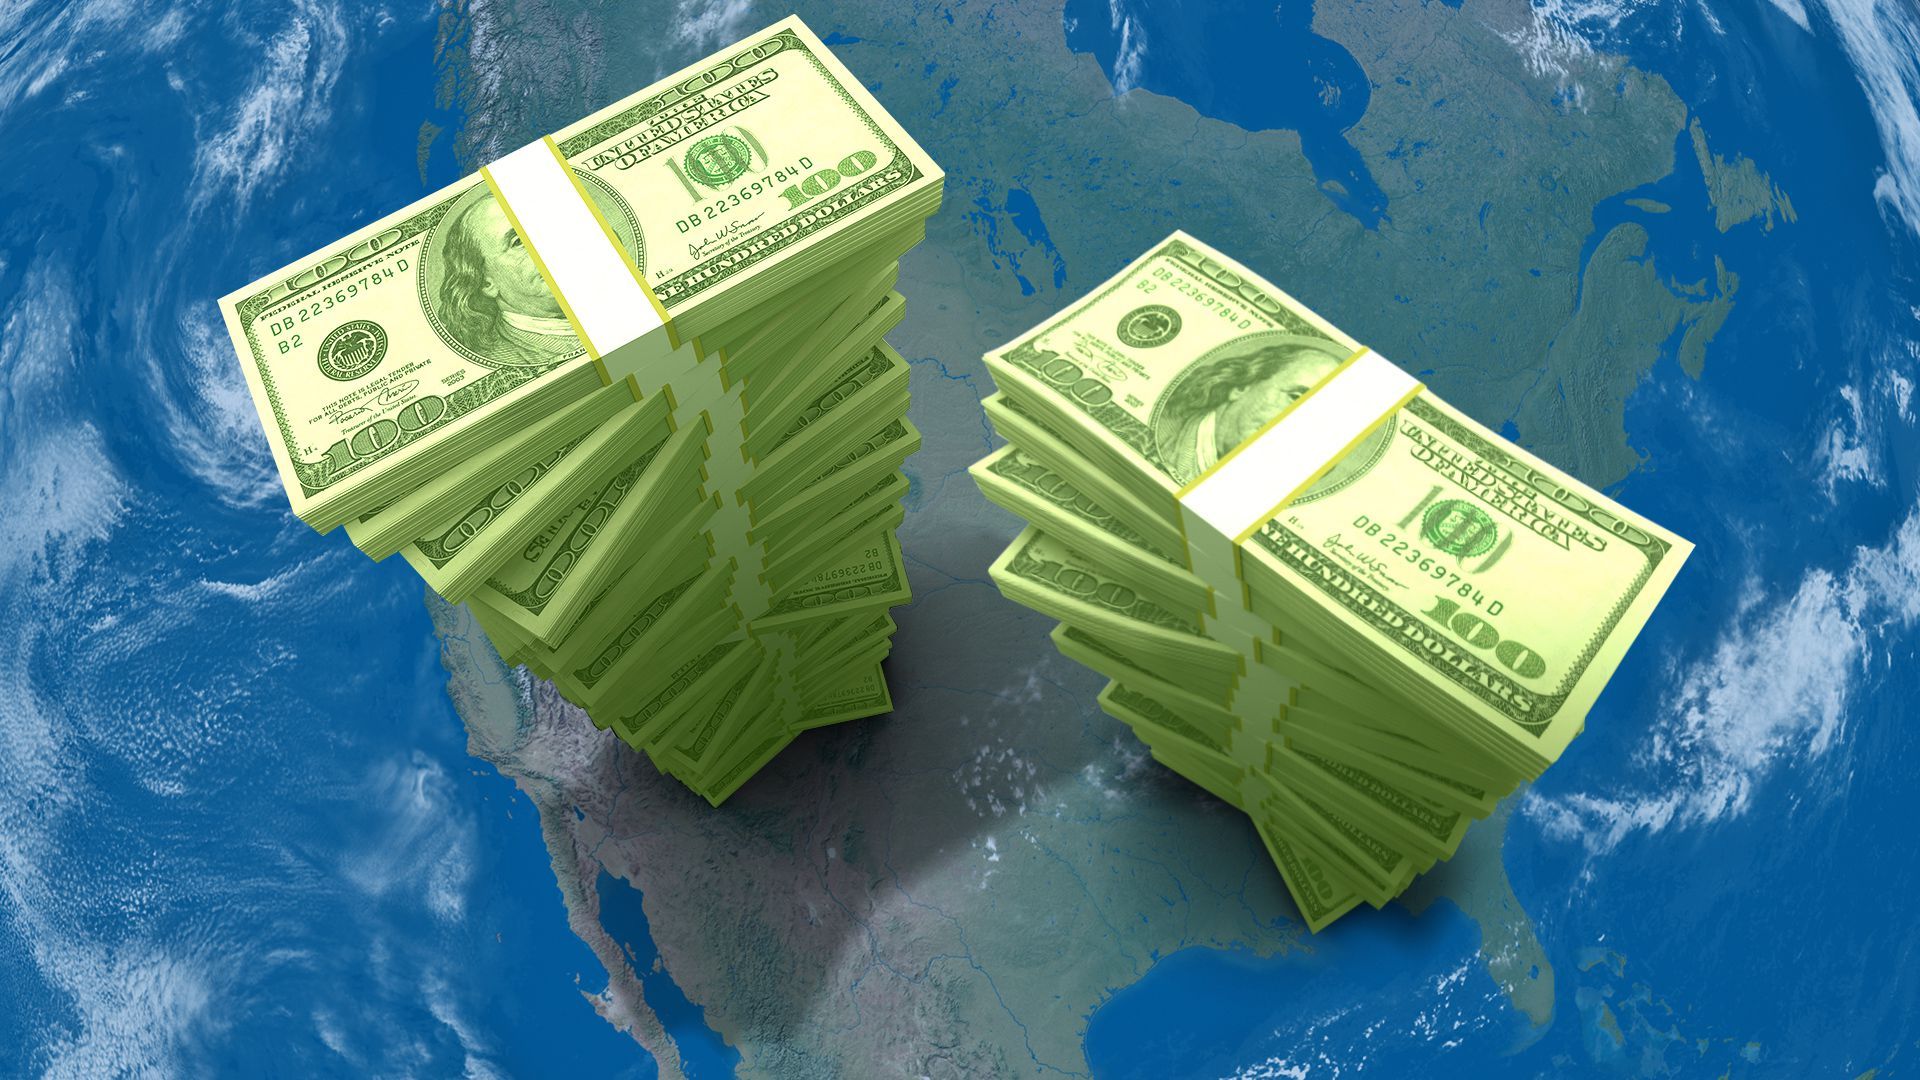 Illustration of a top down view of Earth with two large stacks of money towering over the continent. 